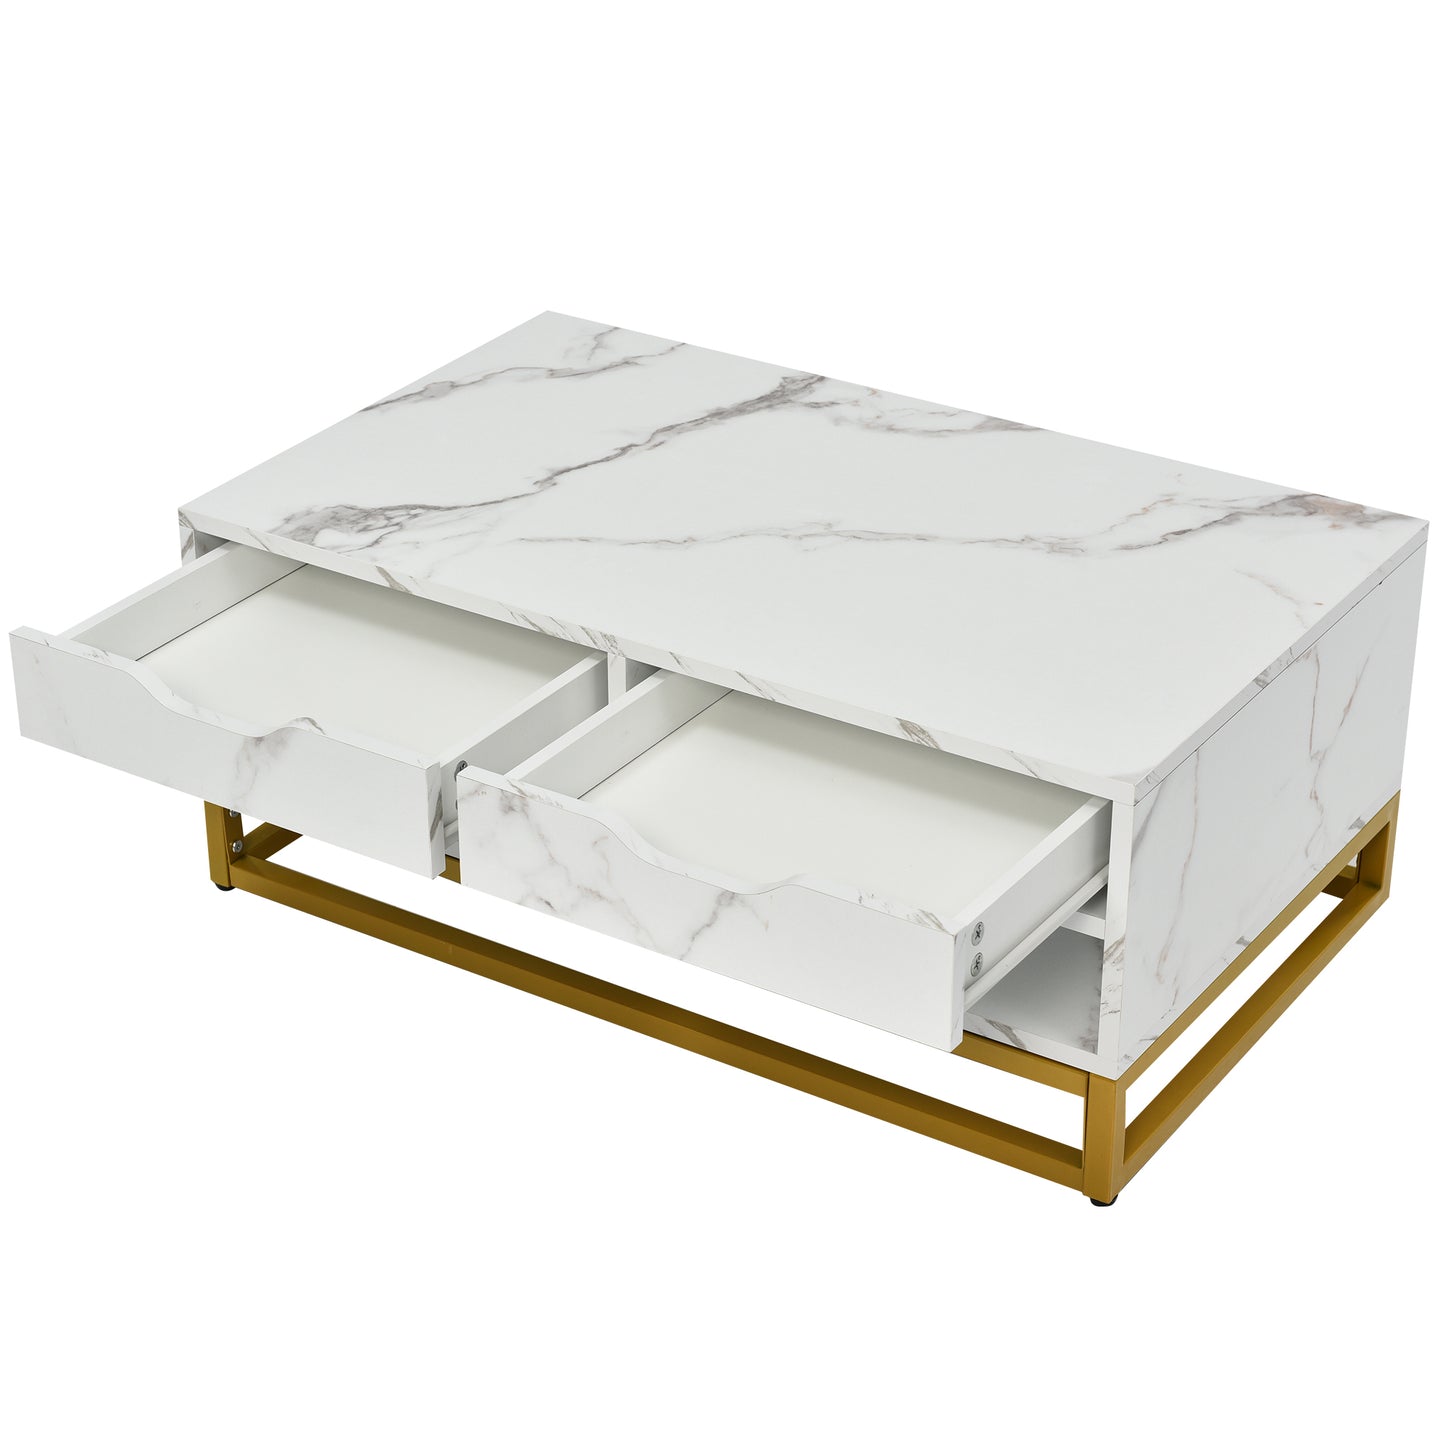 Golden Marble Nesting Coffee Table Set with Metal Frame, Drawers & Shelves Storage